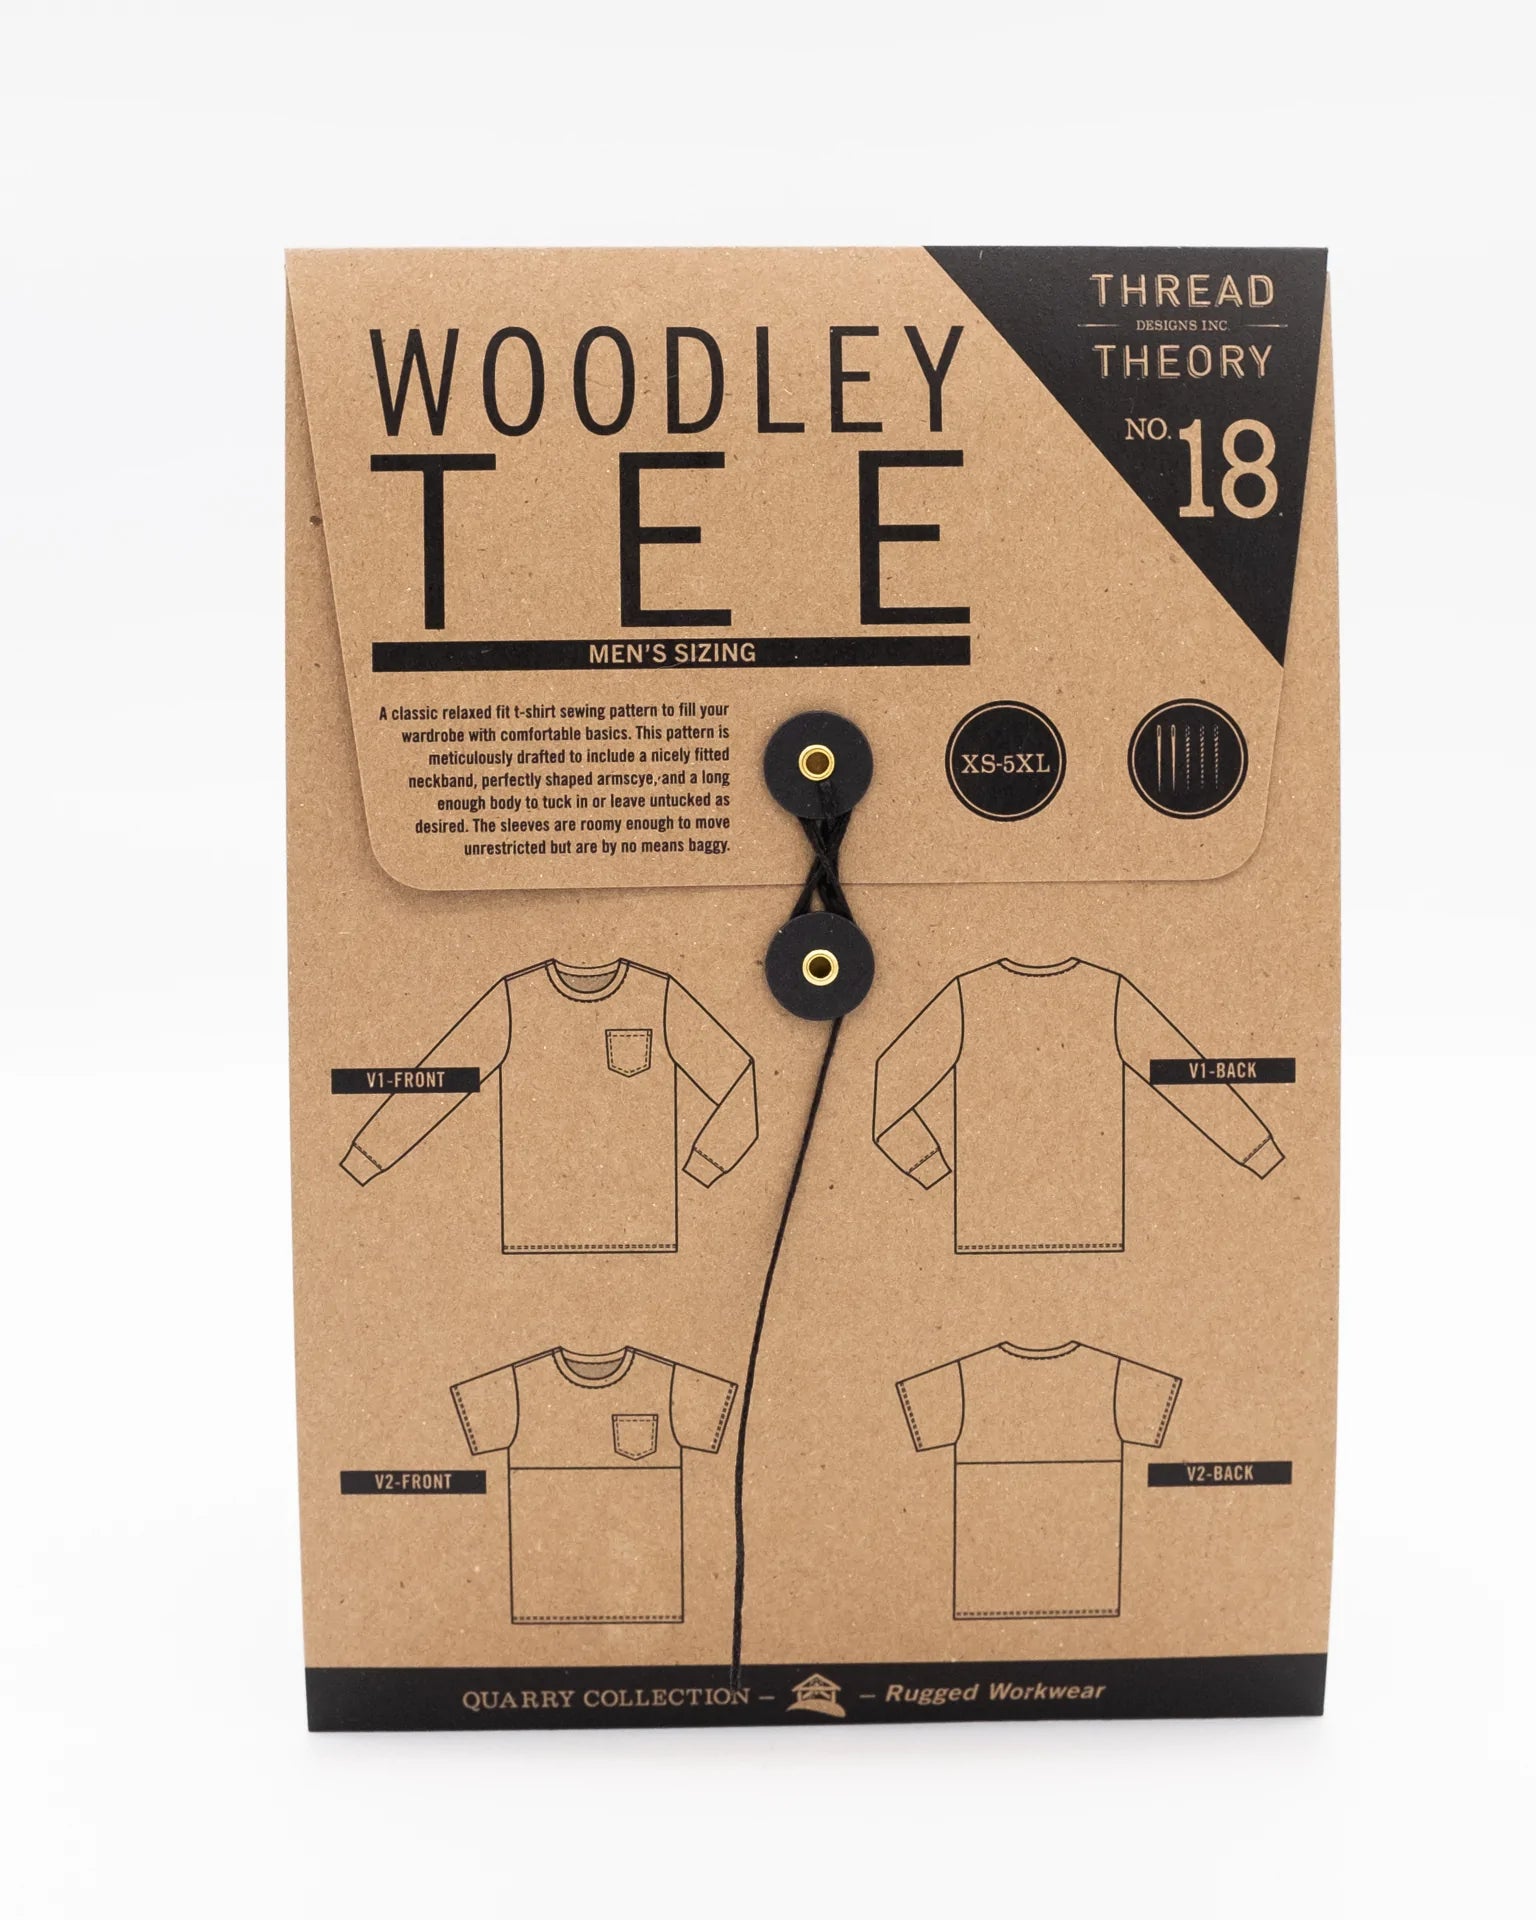 Thread Theory No 18 Woodley Tee (Mens Sizing)